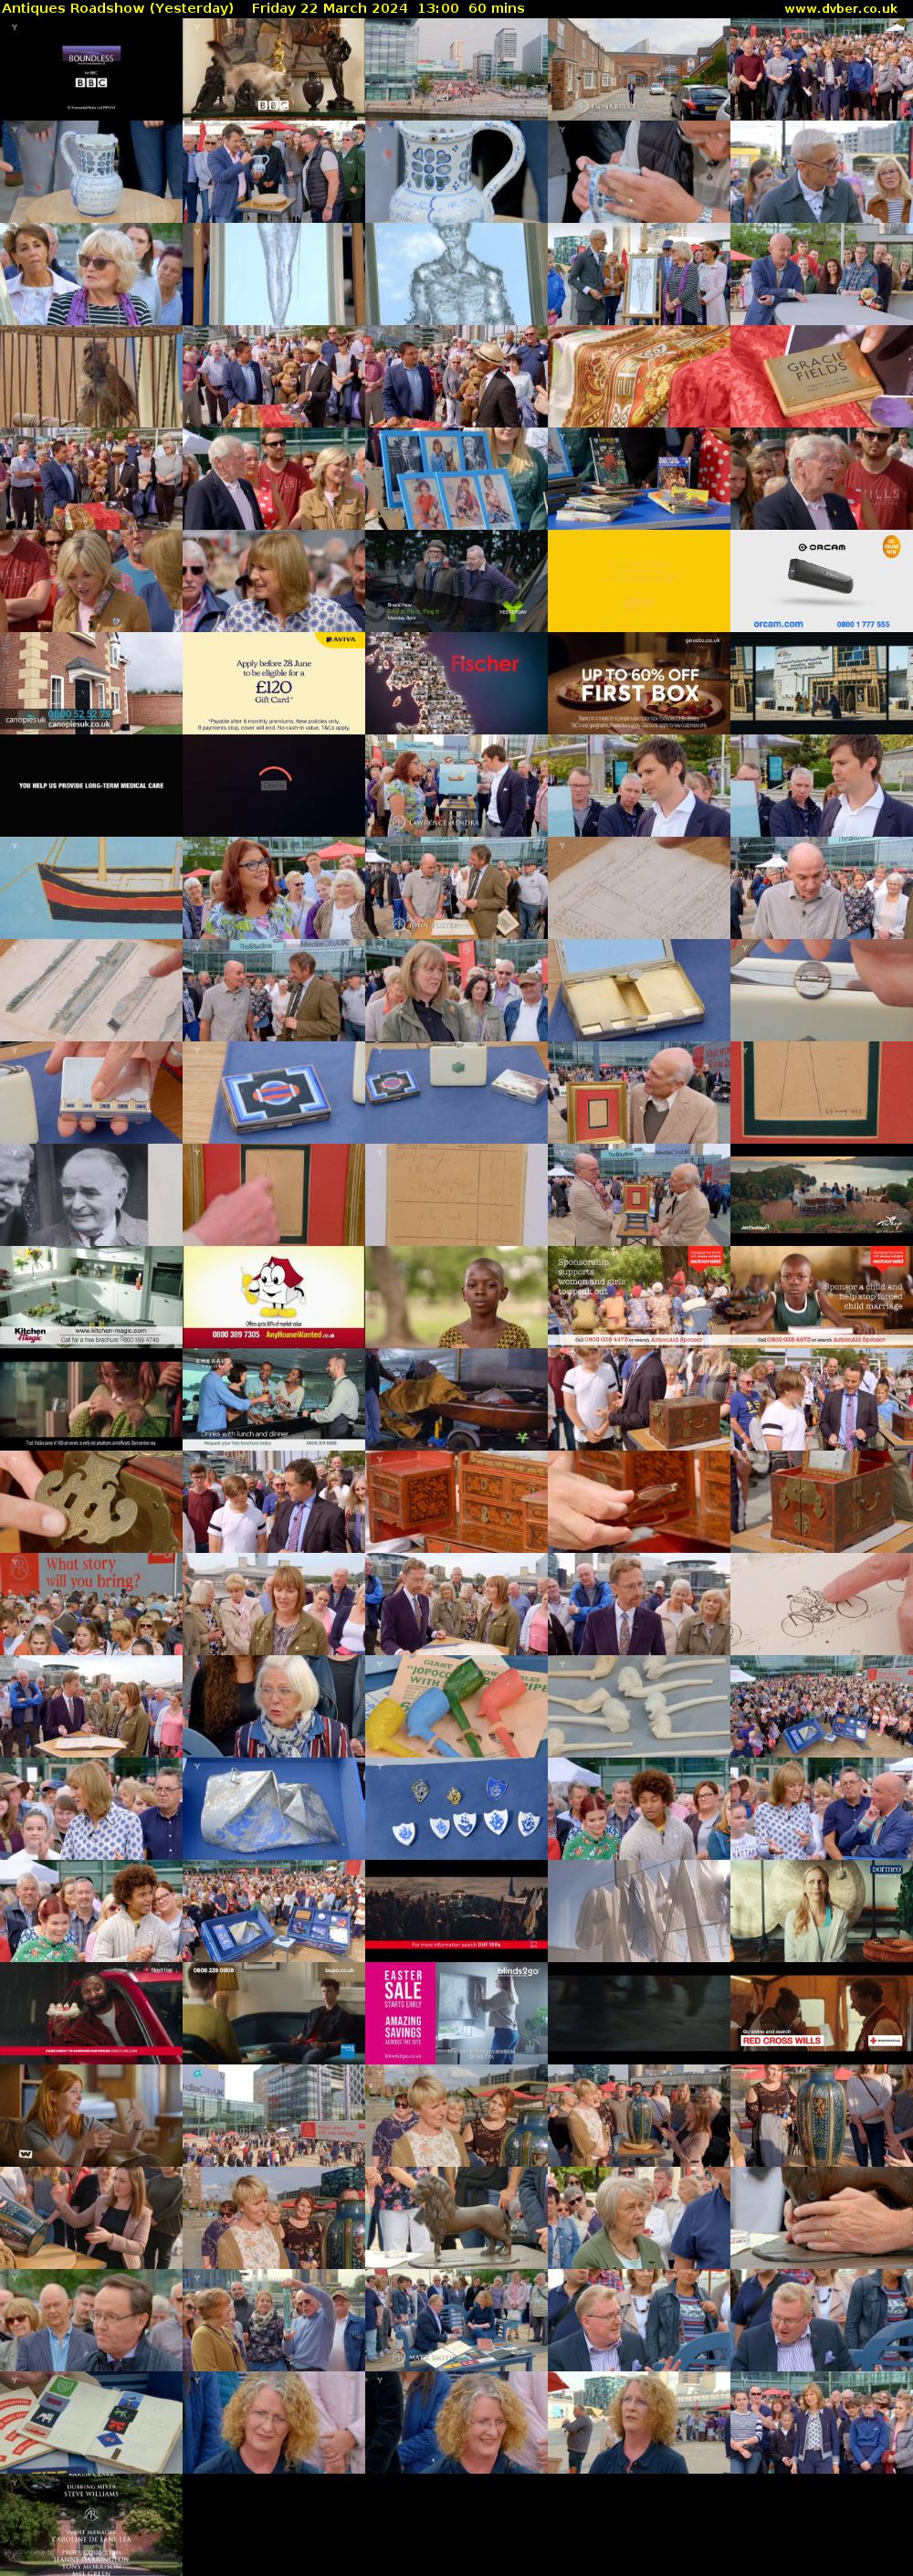 Antiques Roadshow (Yesterday) Friday 22 March 2024 13:00 - 14:00